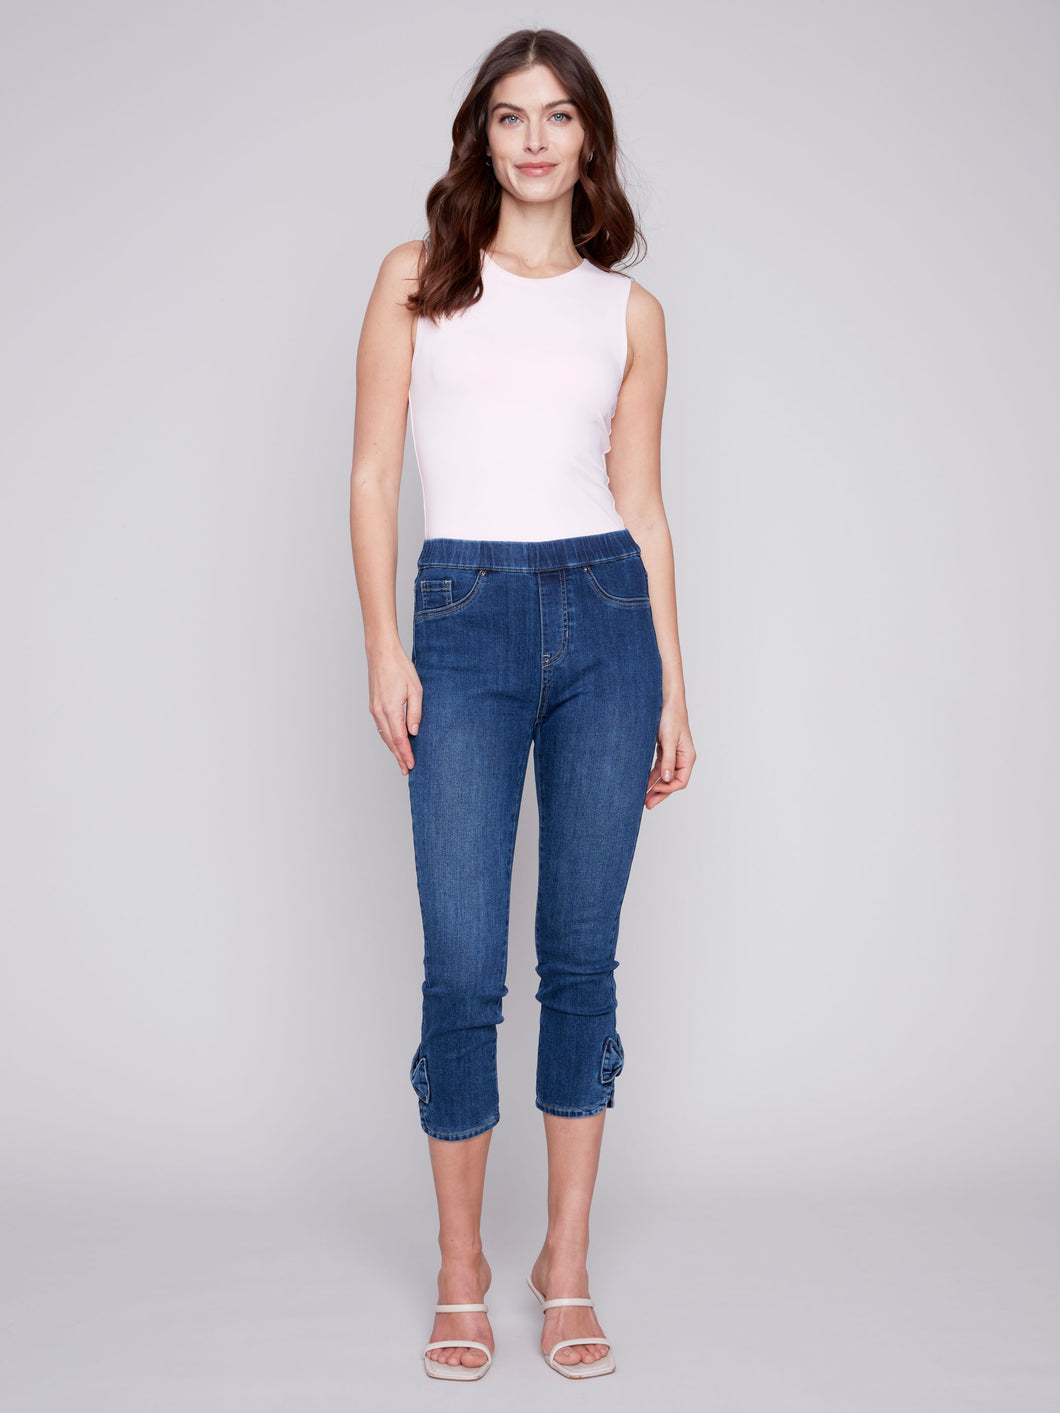 Charlie b Pull On Pant With Bow Detail at Hem